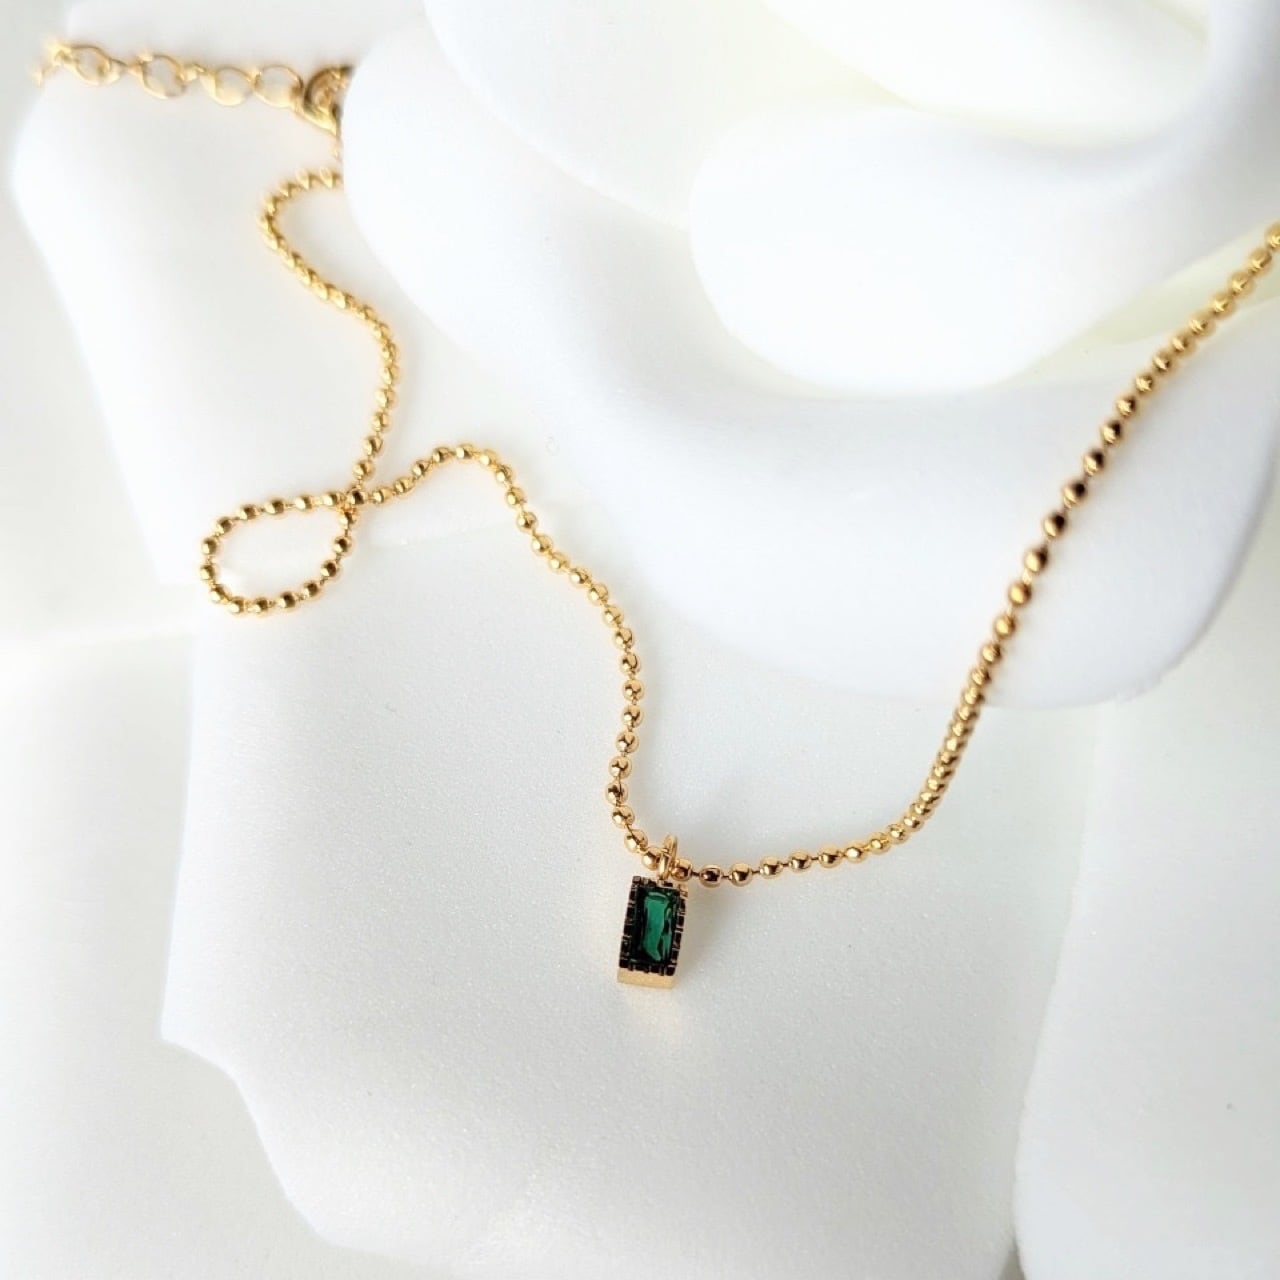 square green necklace ／ スクエア グリーン ネックレス